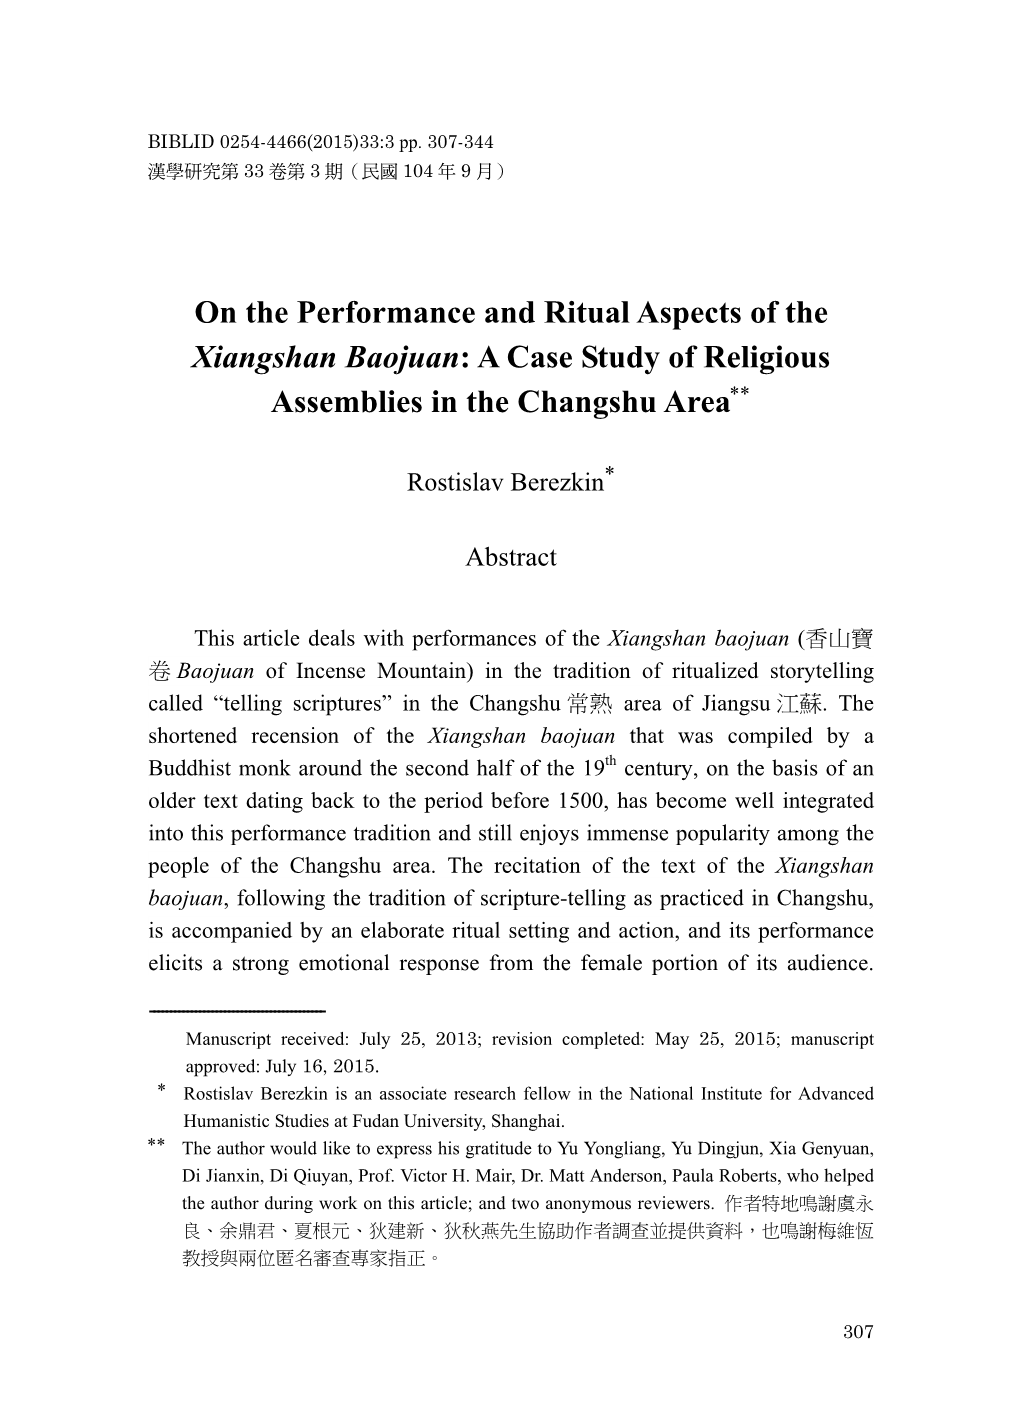 On the Performance and Ritual Aspects of the Xiangshan Baojuan: a Case Study of Religious Assemblies in the Changshu Area